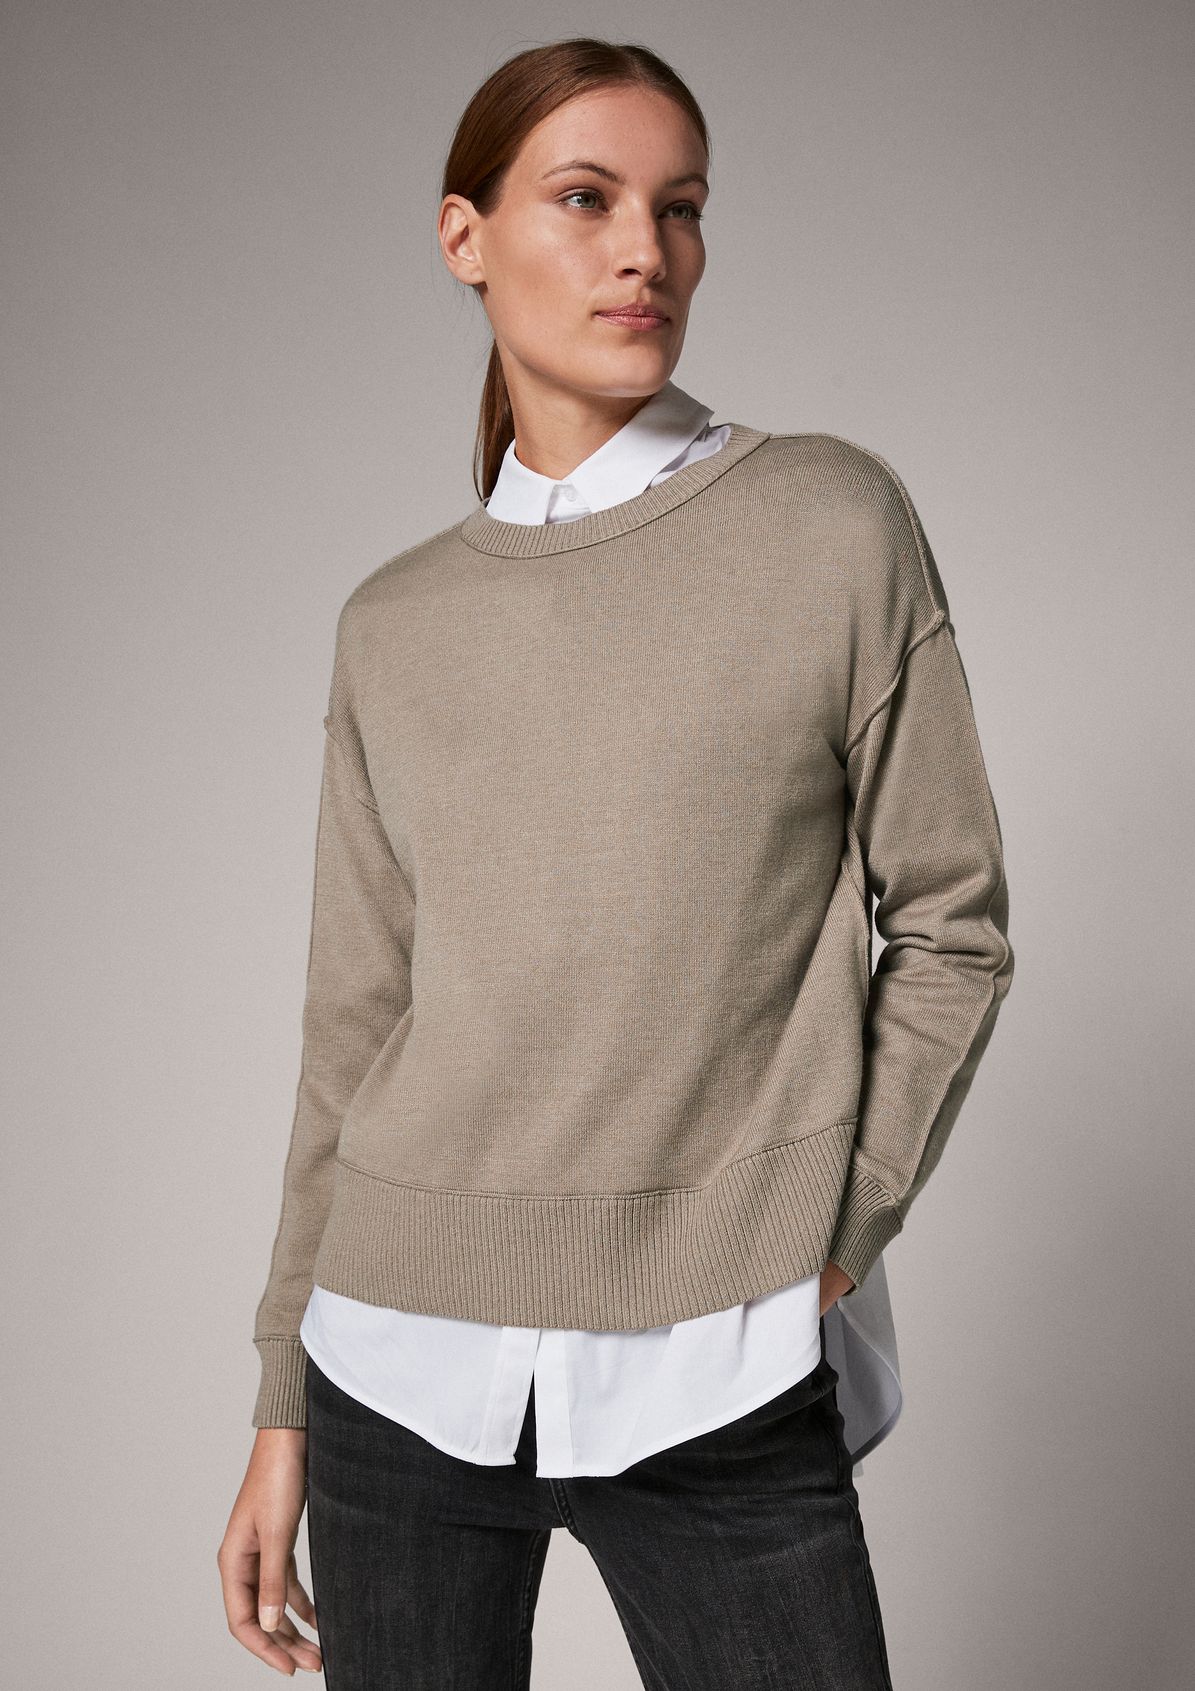 Jumper with ribbed cuffs from comma